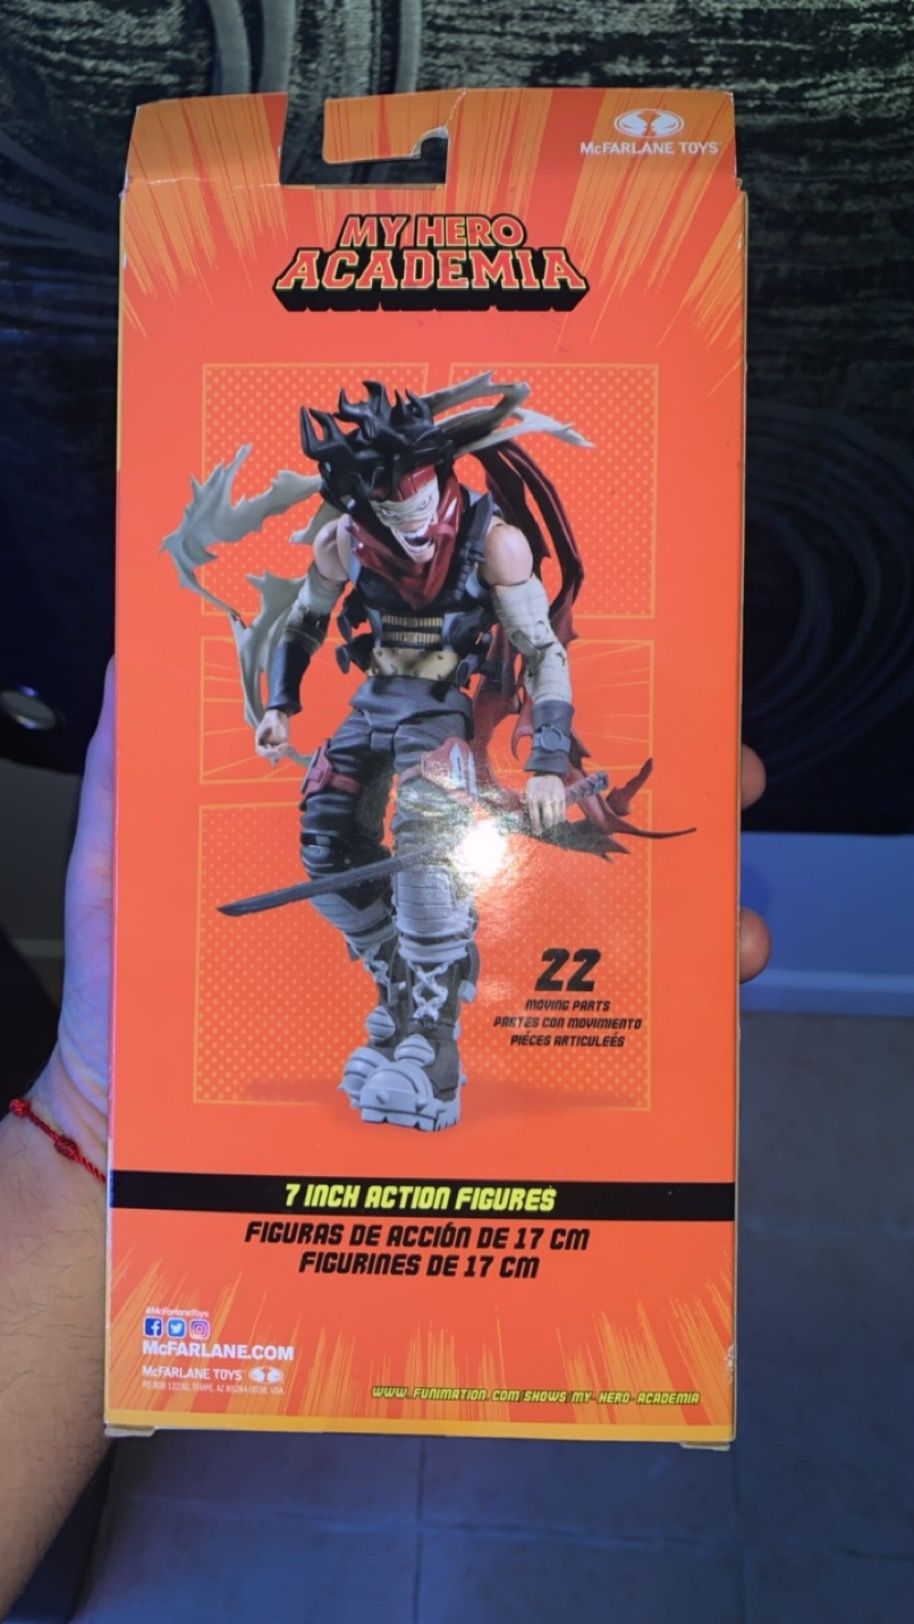 My Hero Academia Character (Stain)For 25$